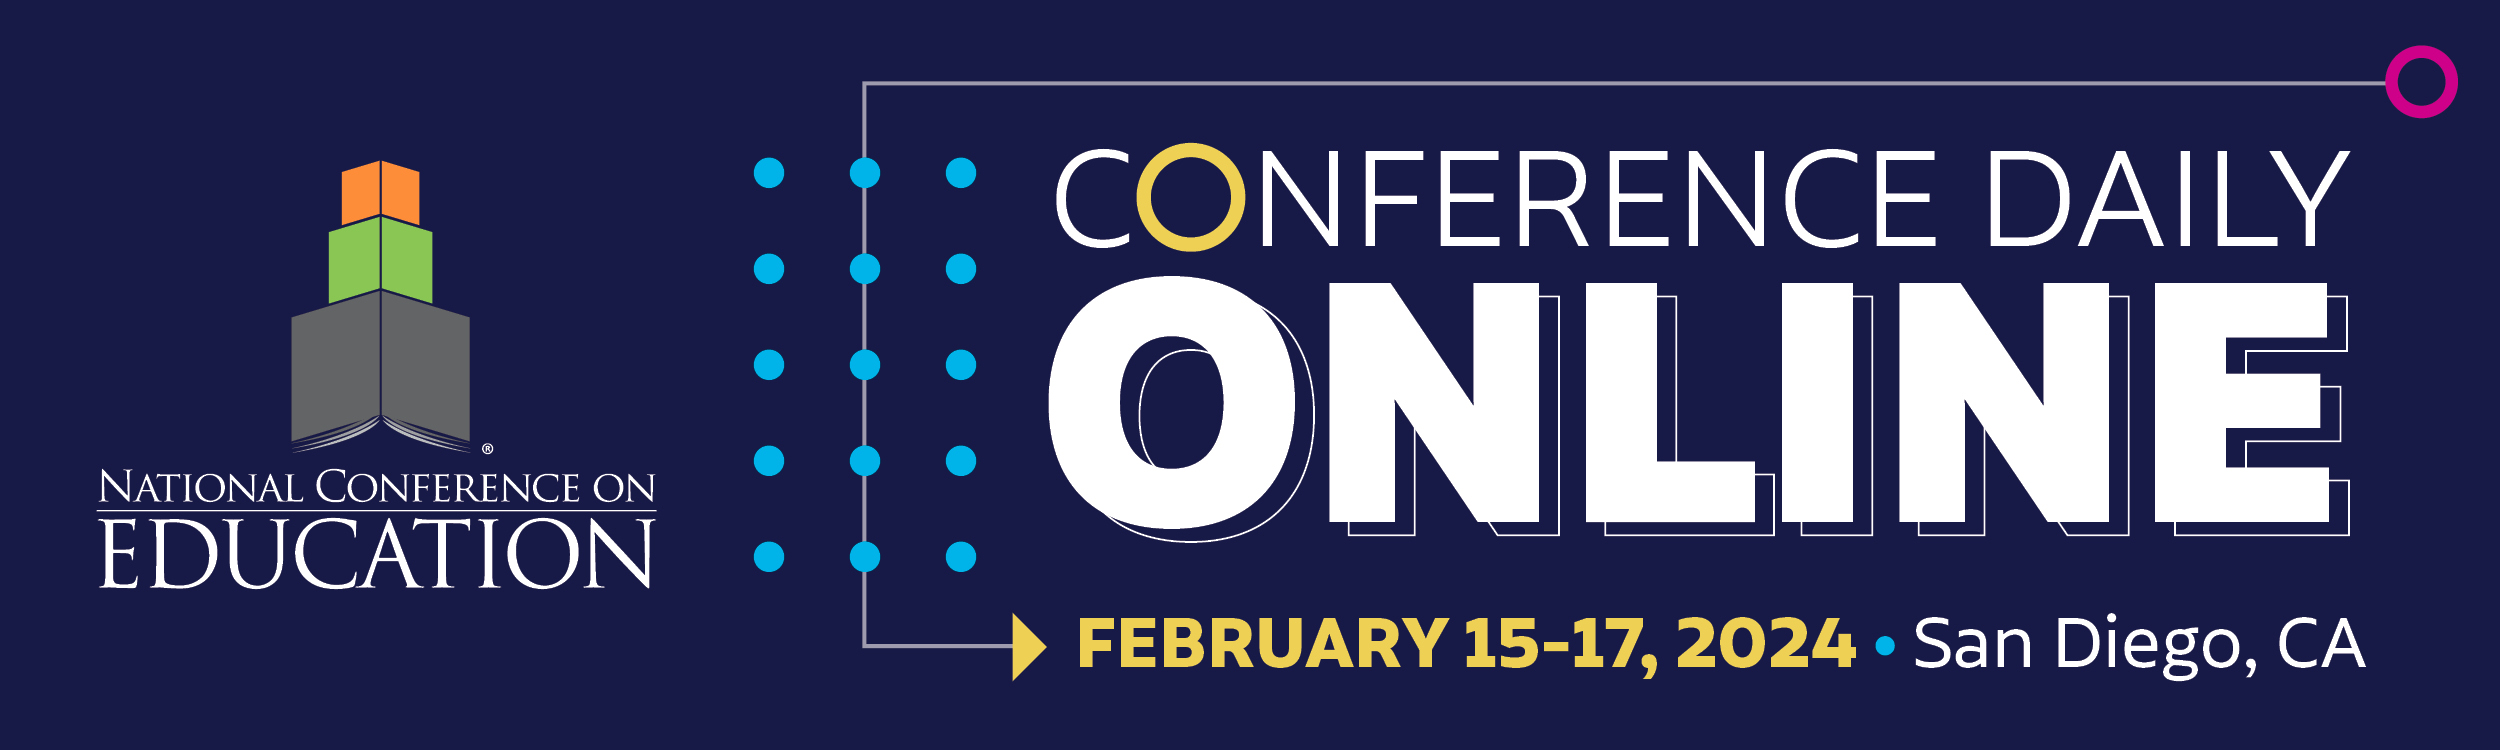 Preconference Issue Conference Daily Online AASA NCE 2025